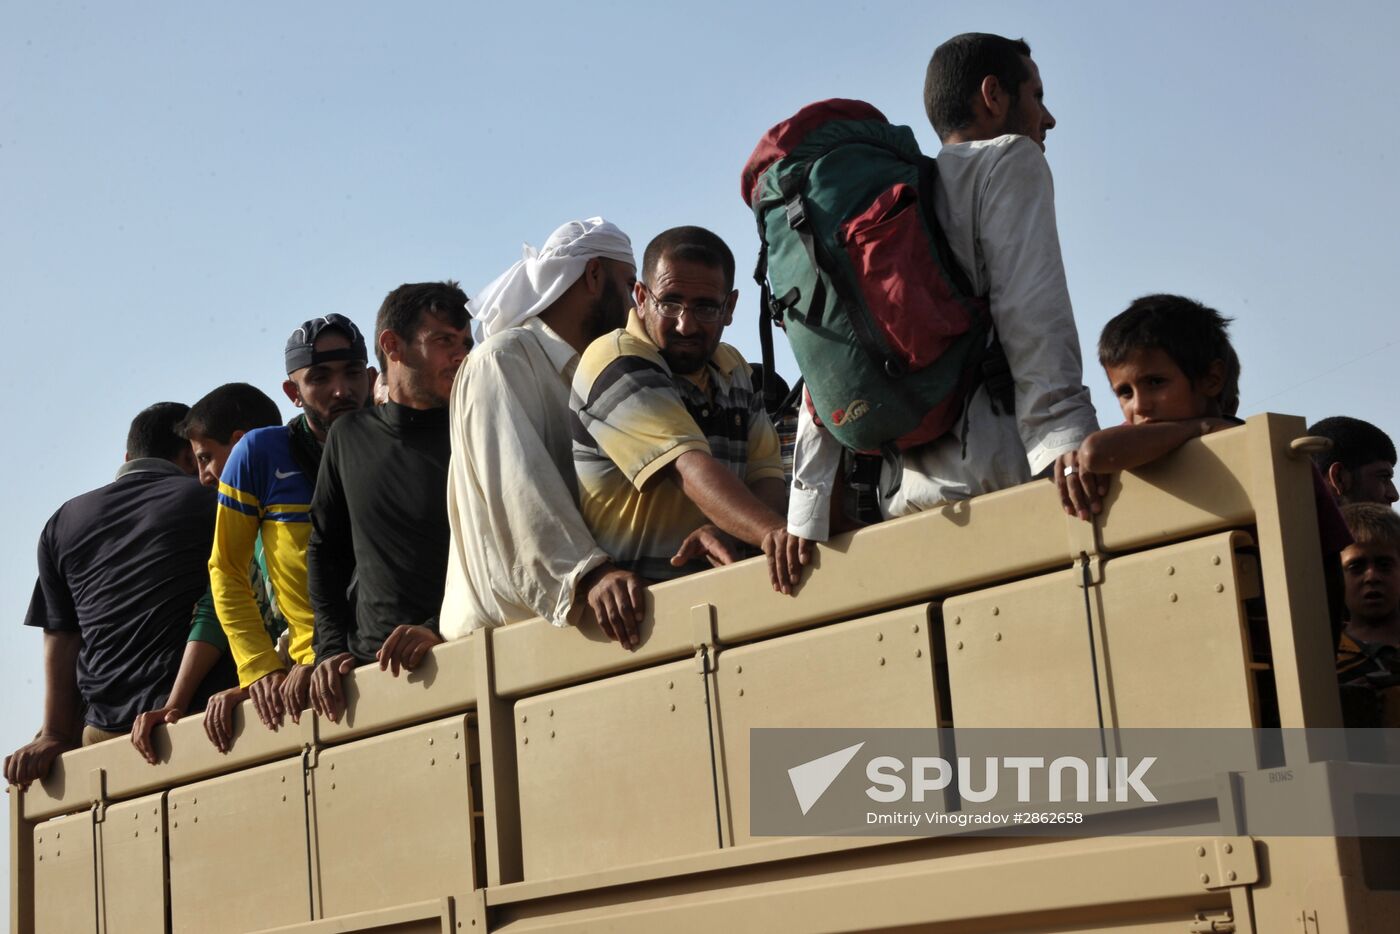 Refugees from ISIS-occupied areas come to Kirkuk in Iraq